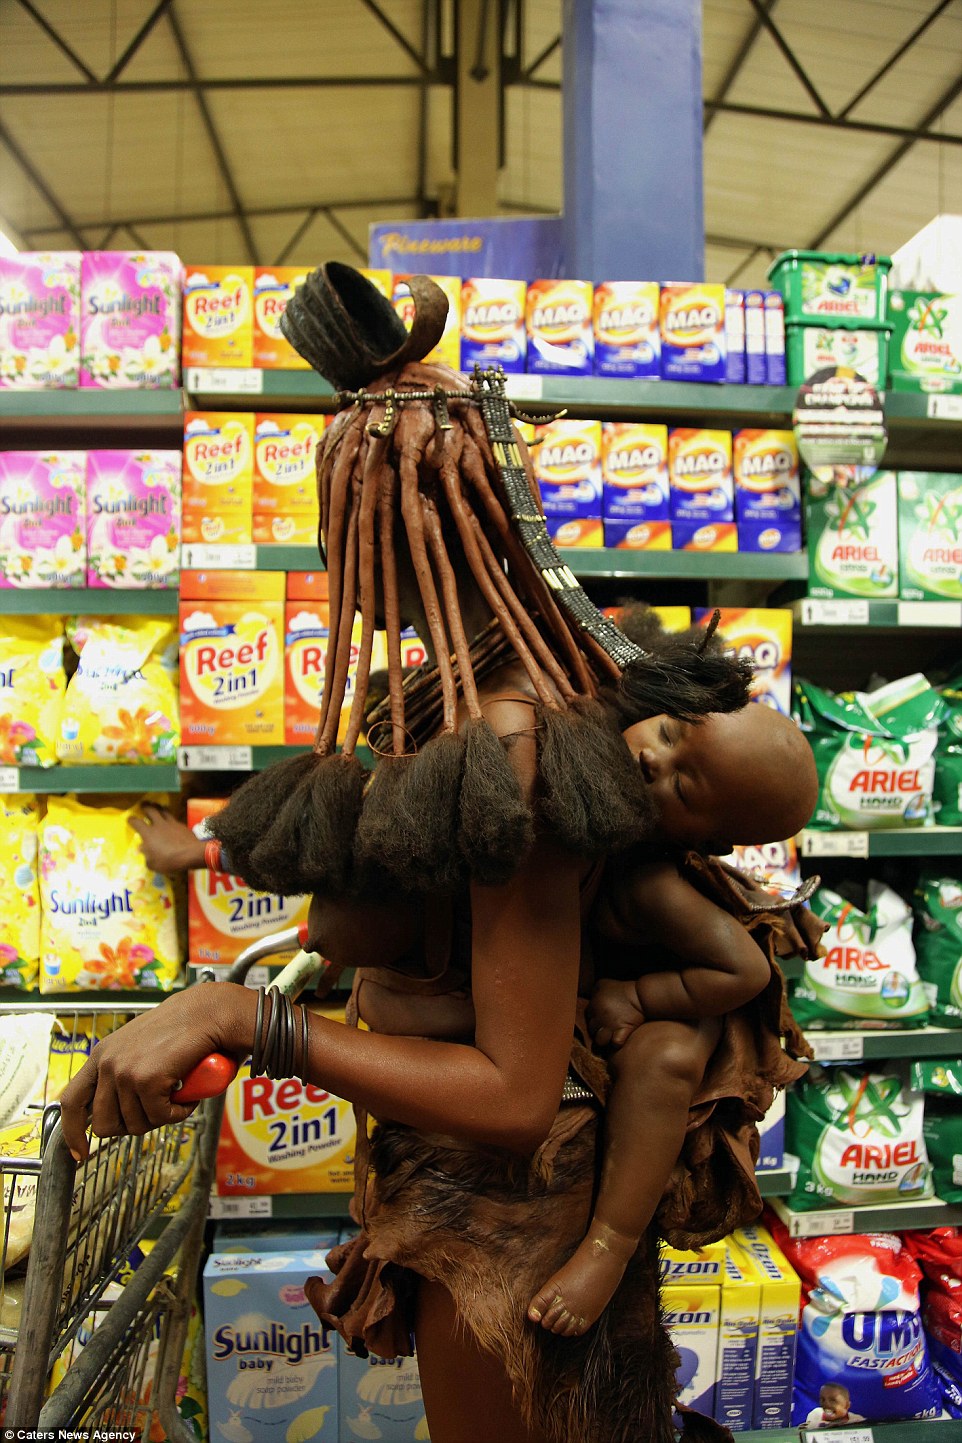 The woman carried a young child as she browsed the shelves of the supermarket in Opuwo, Namibia